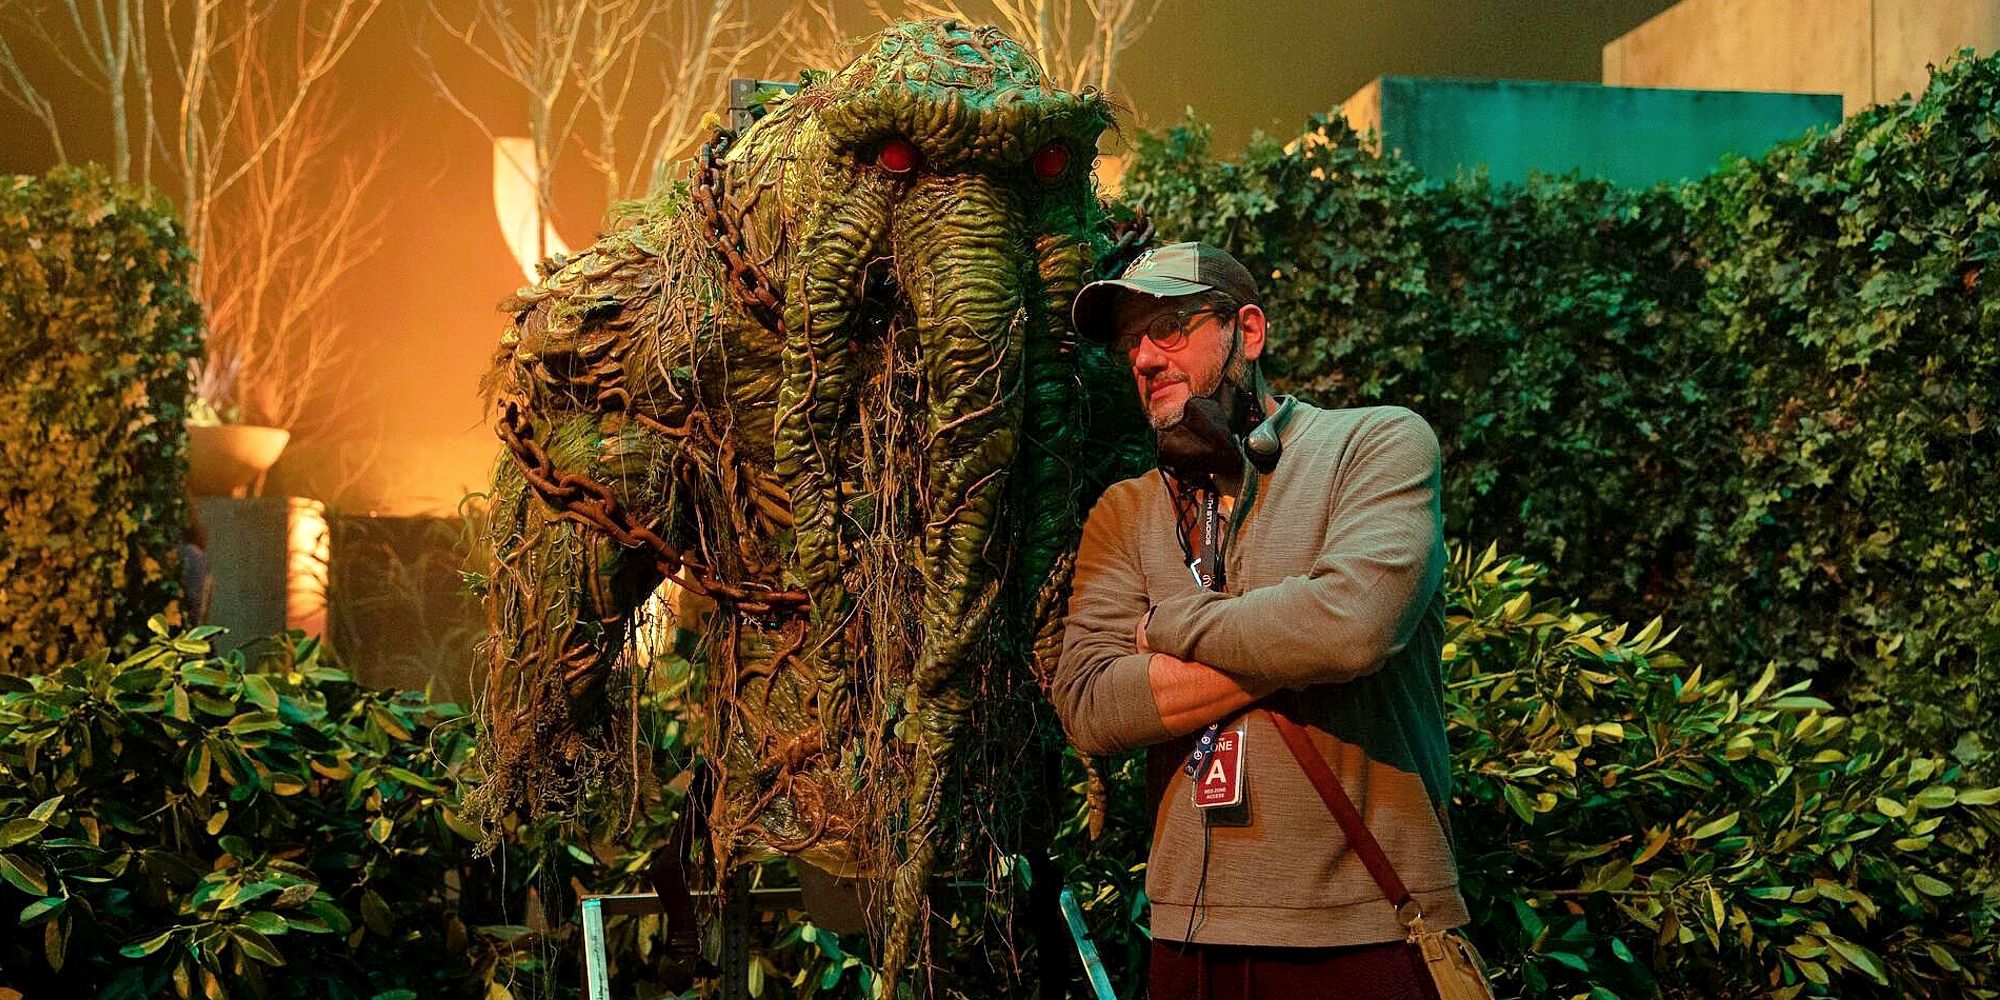 Werewolf By Night BTS Image Reveals MCU Man-Thing Without CGI